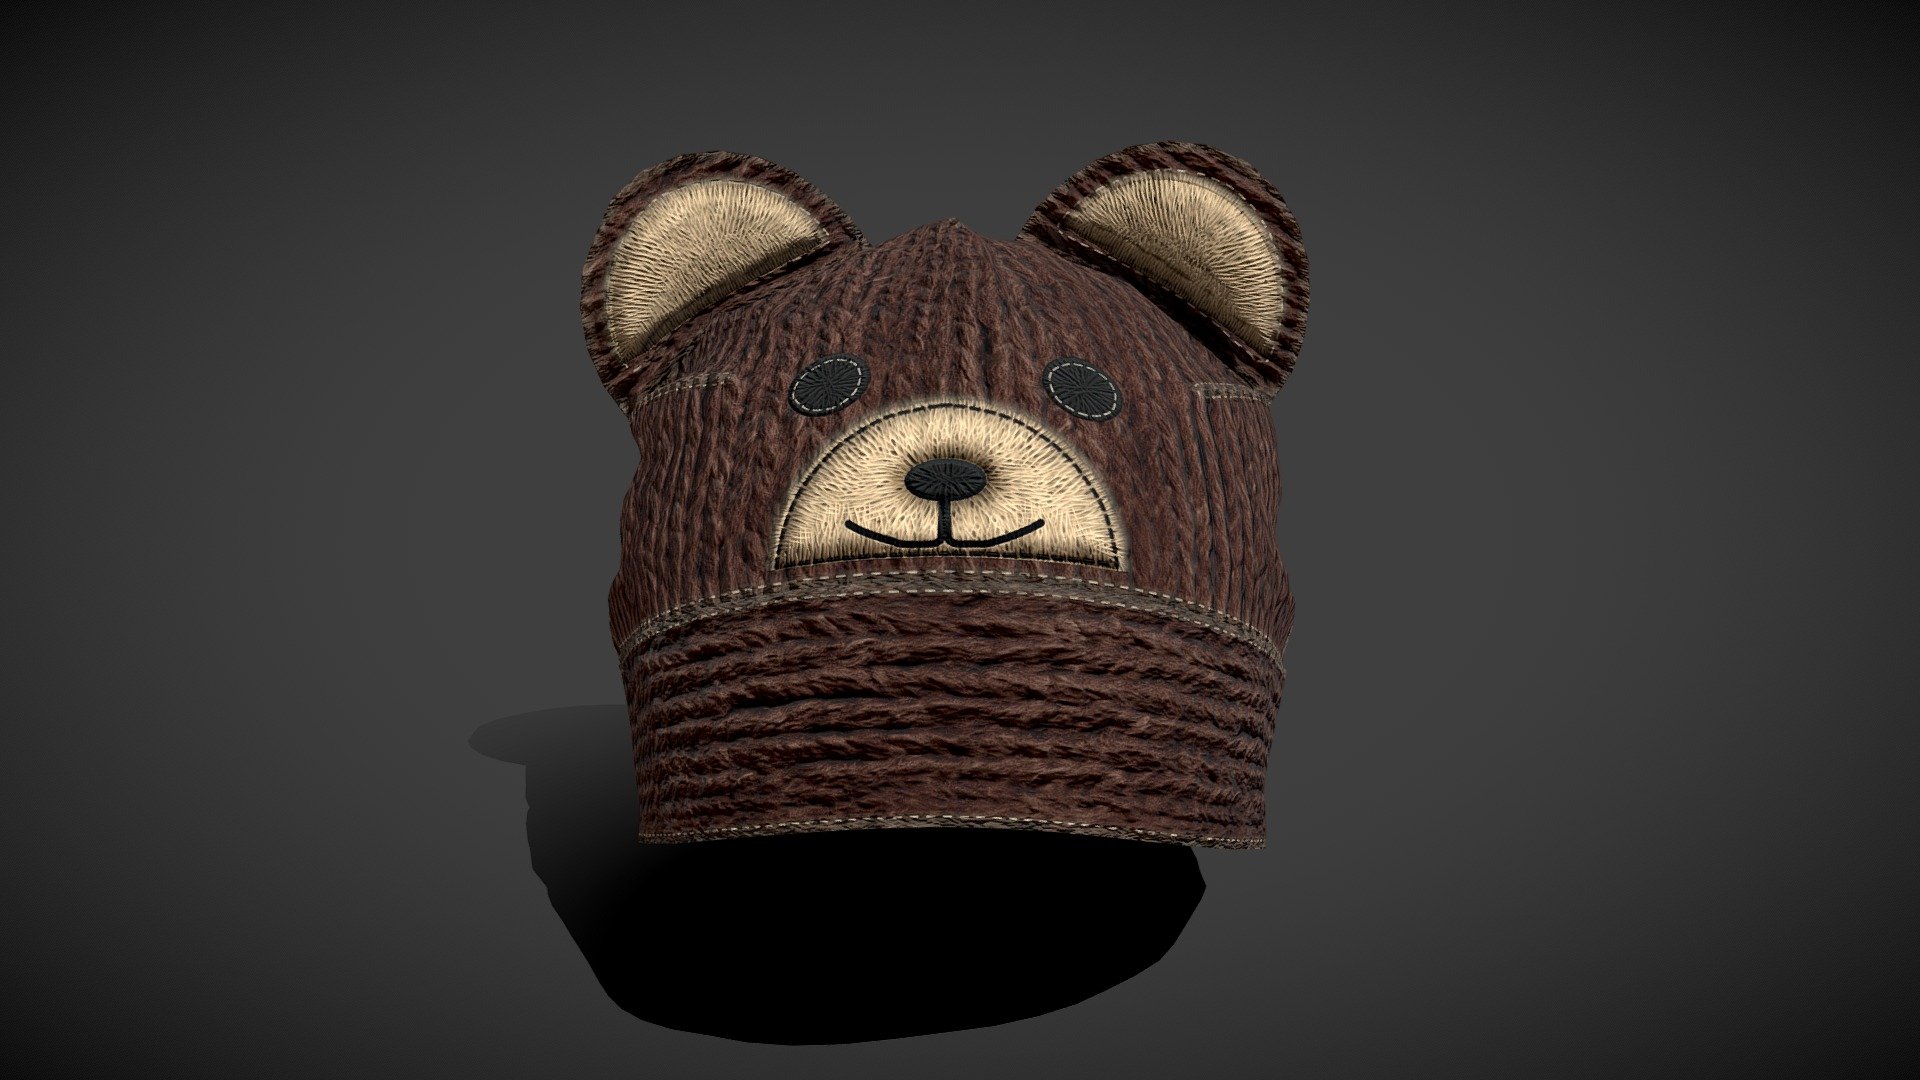 Bear Cap / Funny Cap - low poly

Triangles: 3.5k
Vertices: 1.8k

4096x4096 PNG texture

Hats - Headwear &lt;&lt; - Bear Cap / Funny Cap - low poly - Buy Royalty Free 3D model by Karolina Renkiewicz (@KarolinaRenkiewicz) 3d model